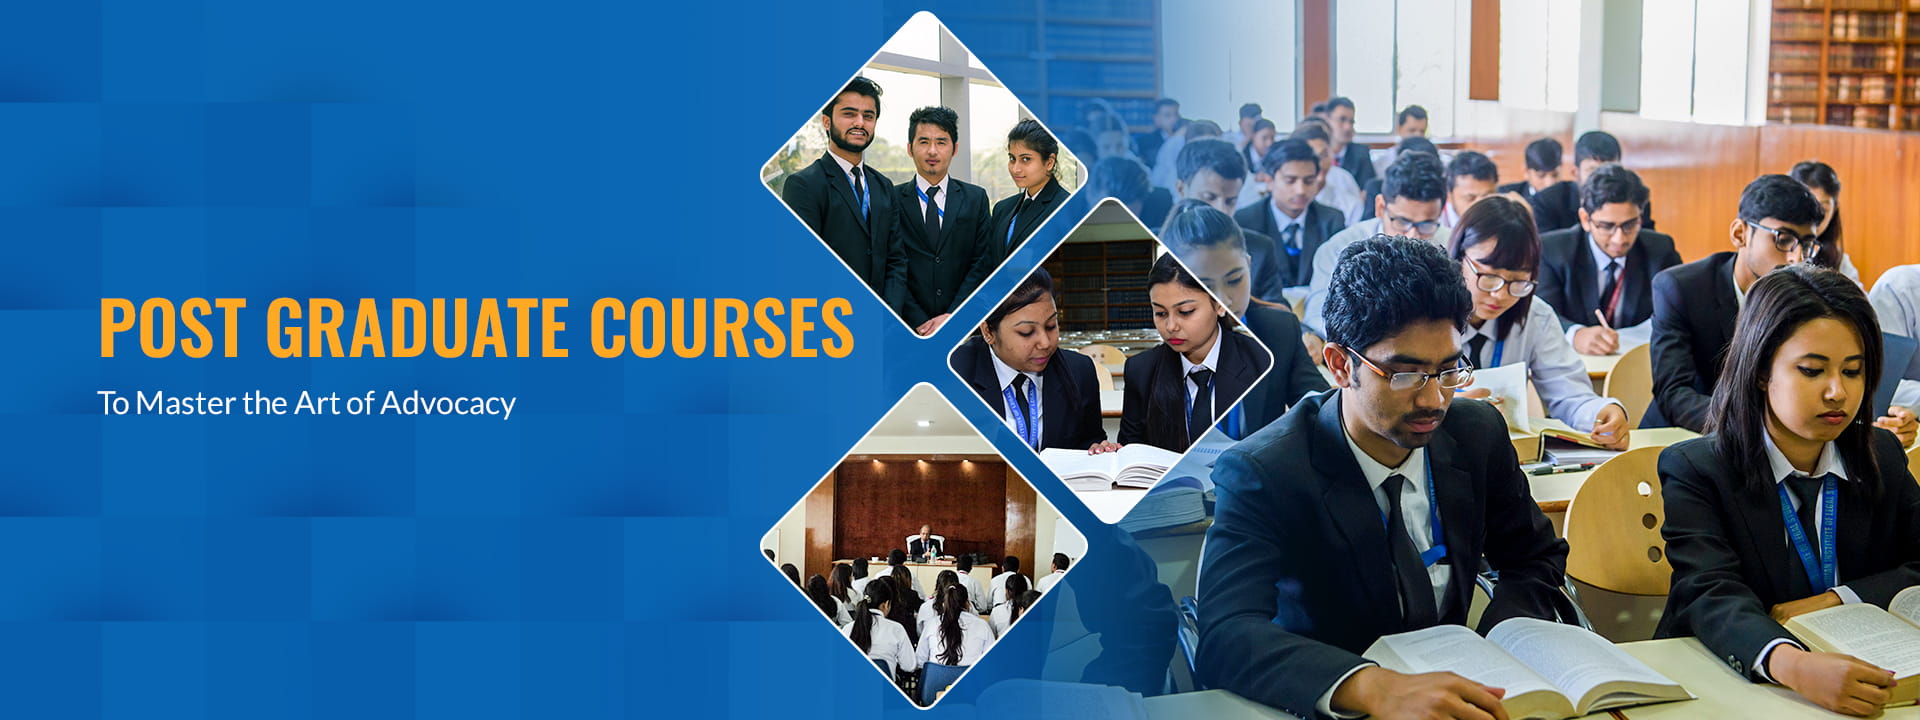 Post Graduate Courses offered by IILS